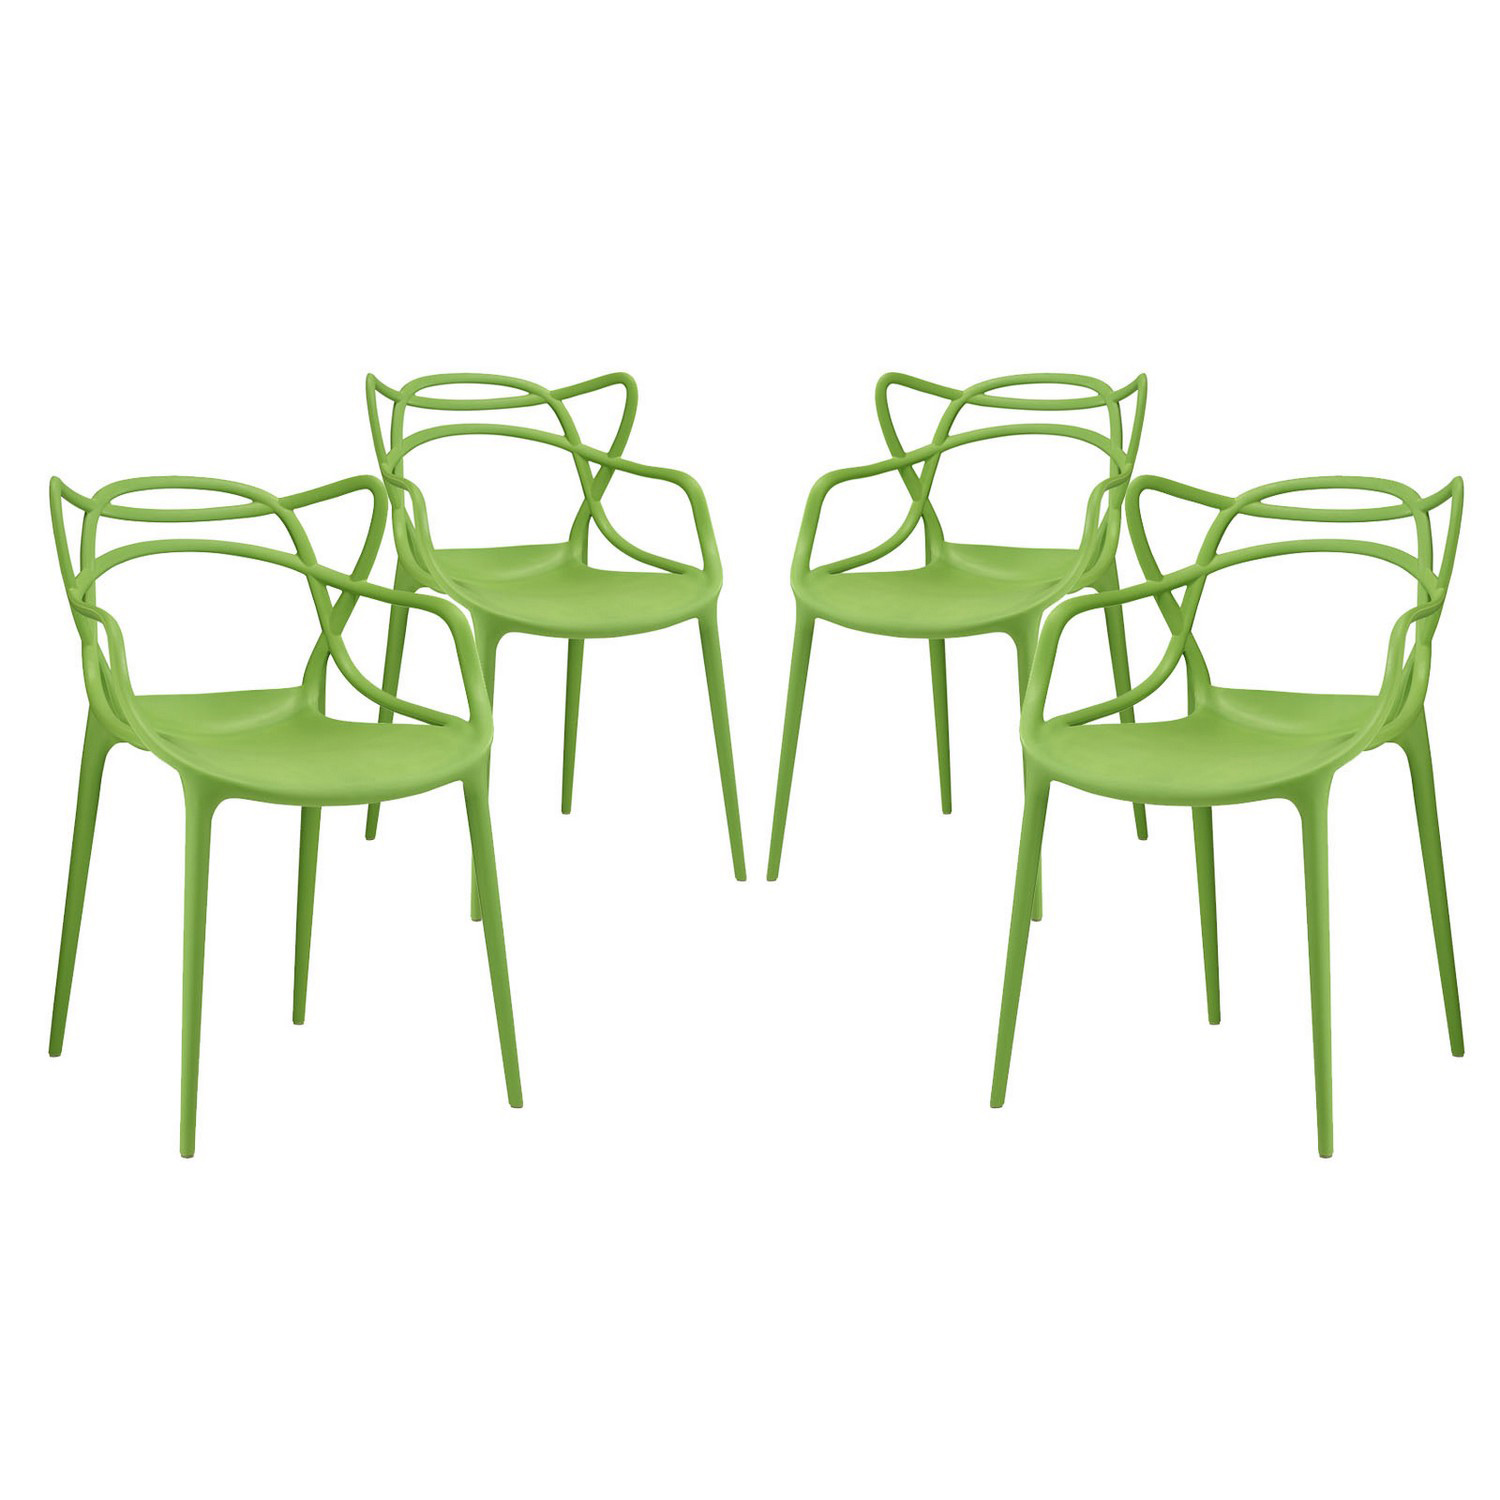 Modway Entangled Dining Chair - Set of 4 - Green